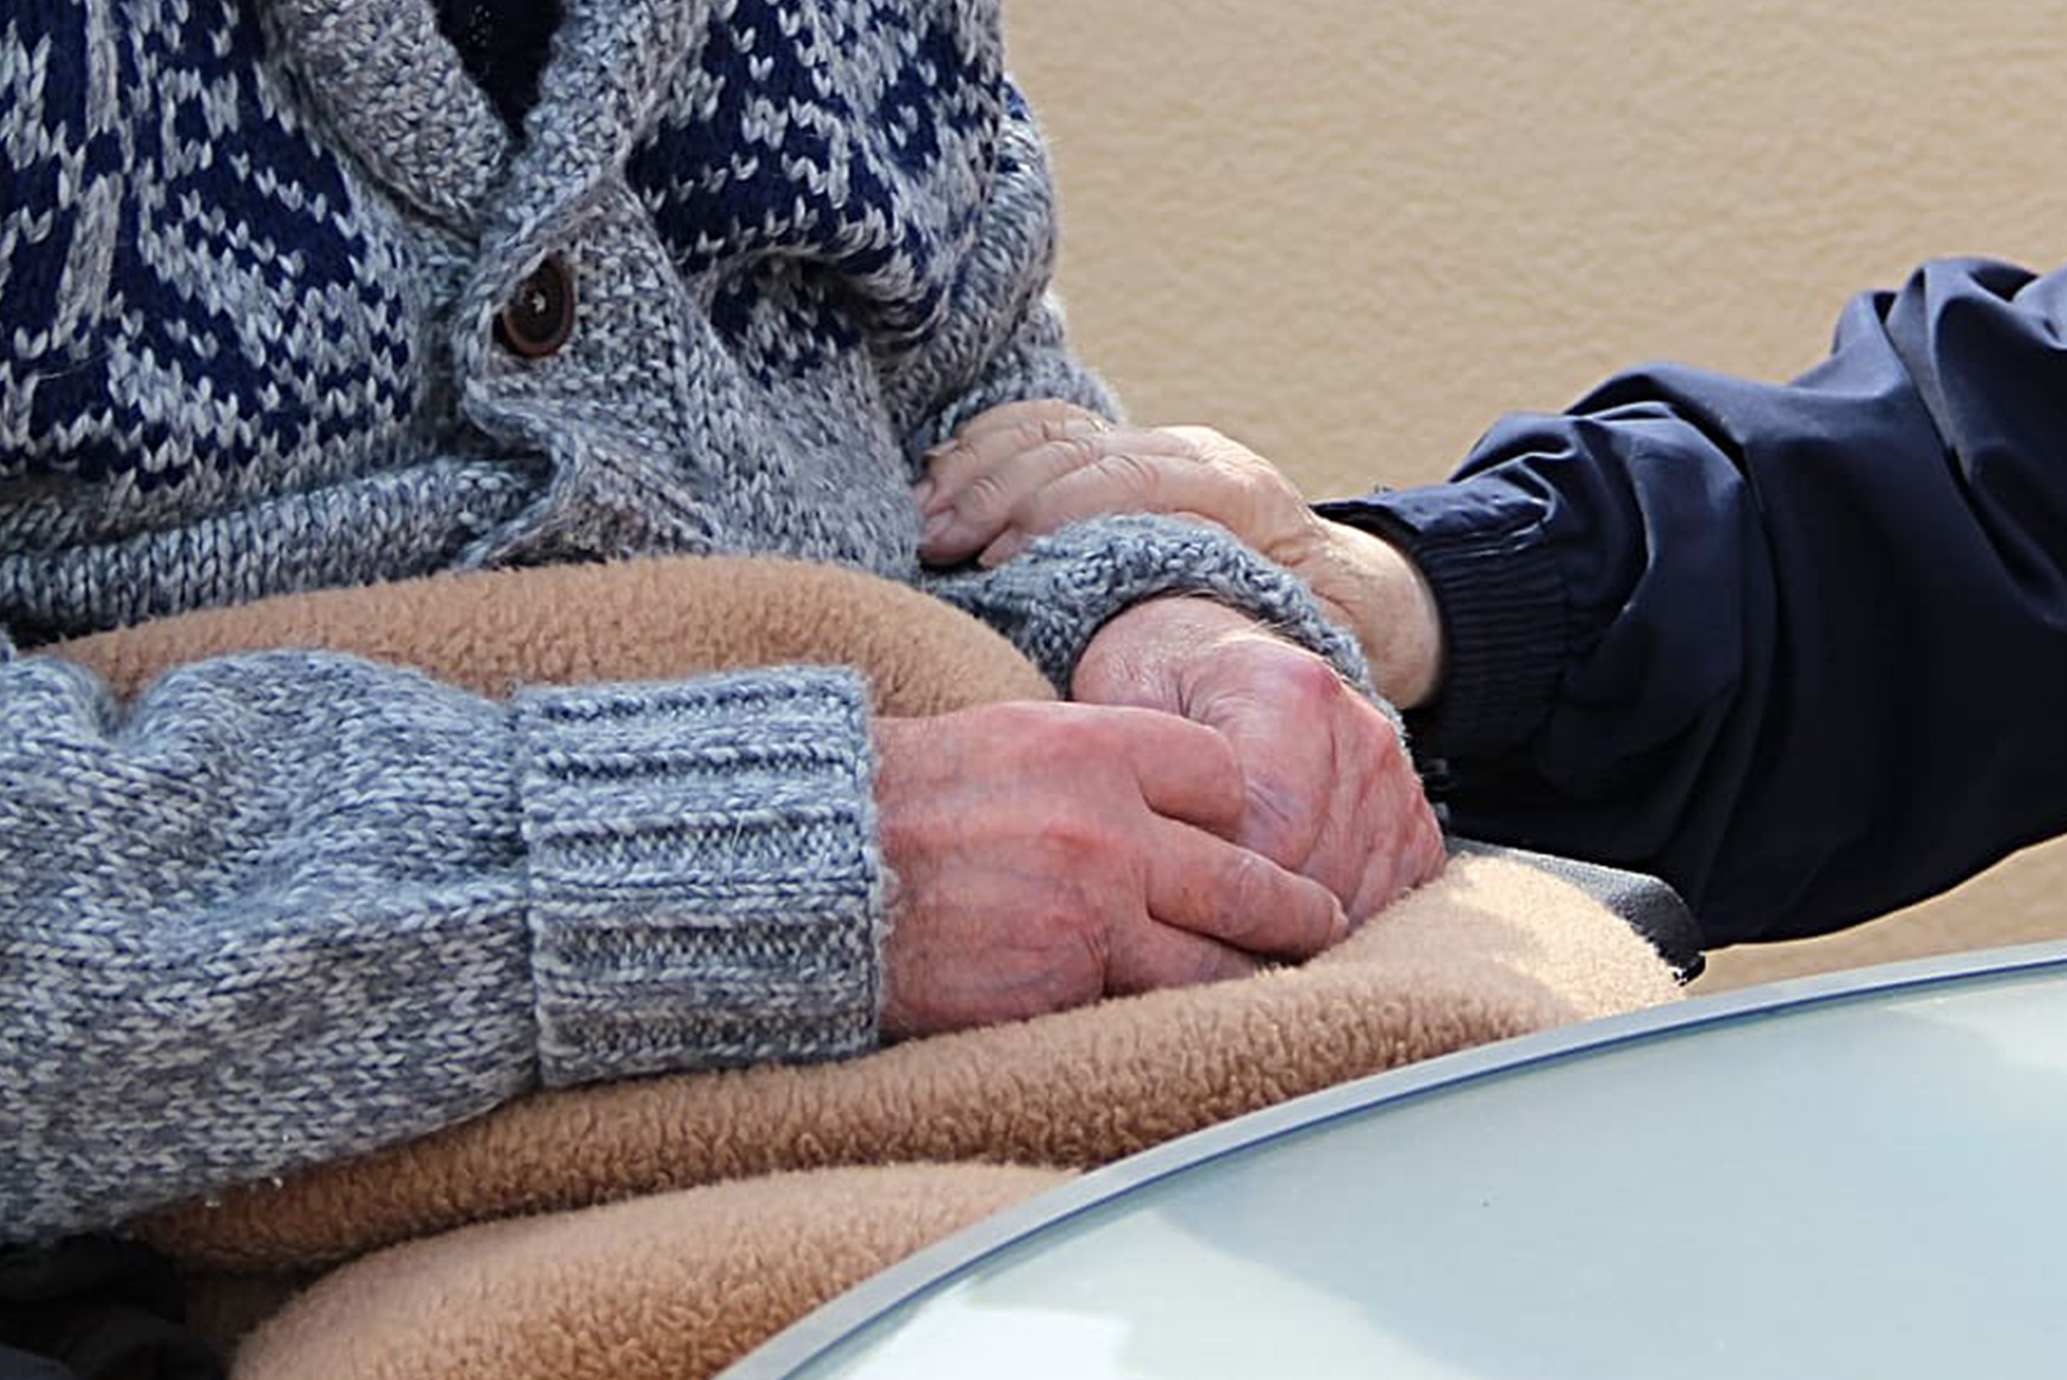 Elderly person's hands in lap with another's hand holding their arm caringly